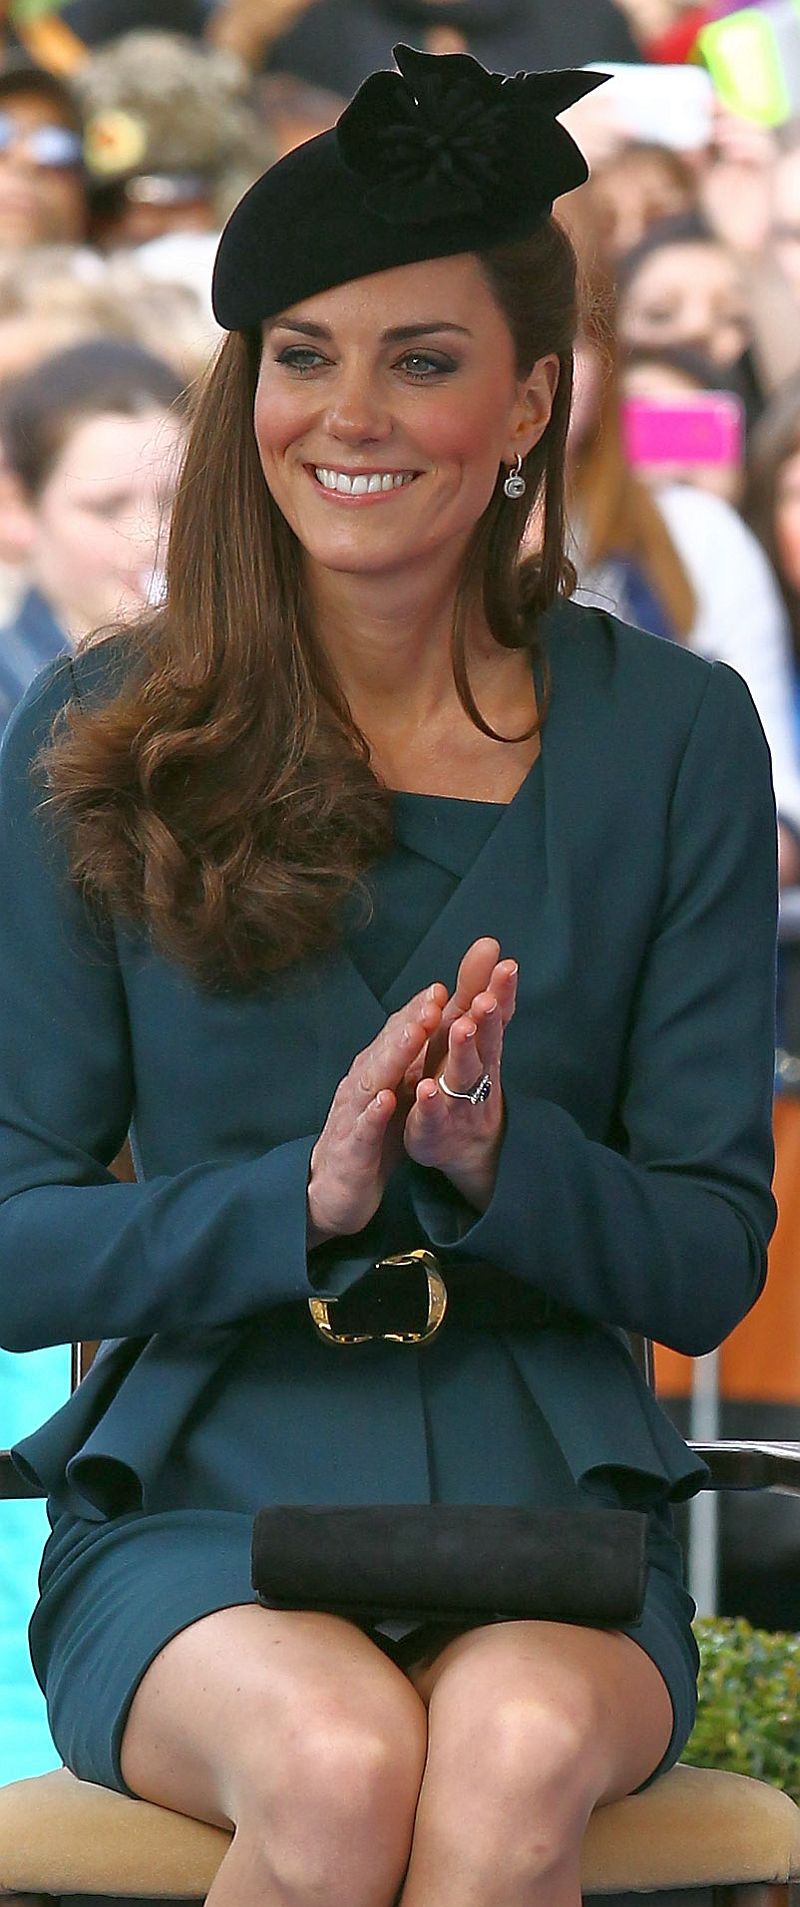 Windy Upskirt of Future Queen Kate Middleton.